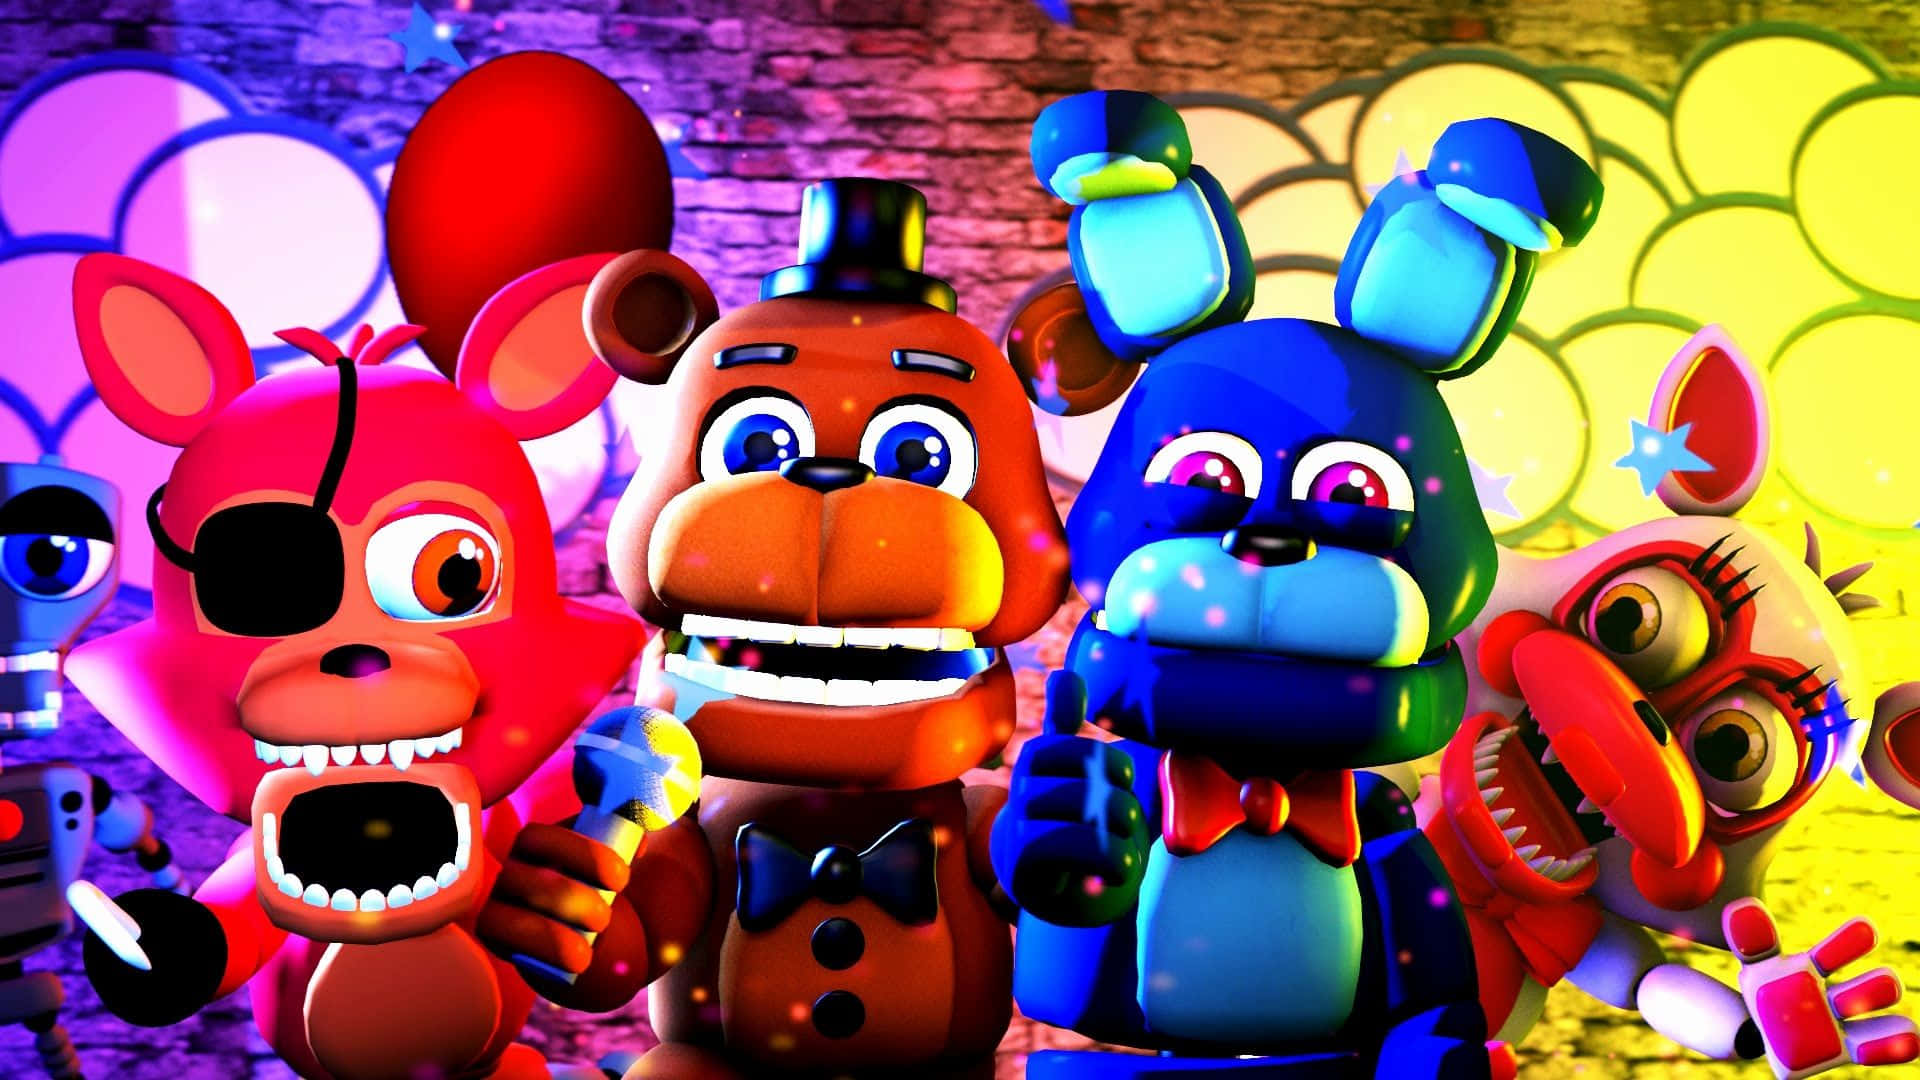 Bring The Fun Into Five Night's At Freddy's With These Cute Fnaf Characters! Wallpaper